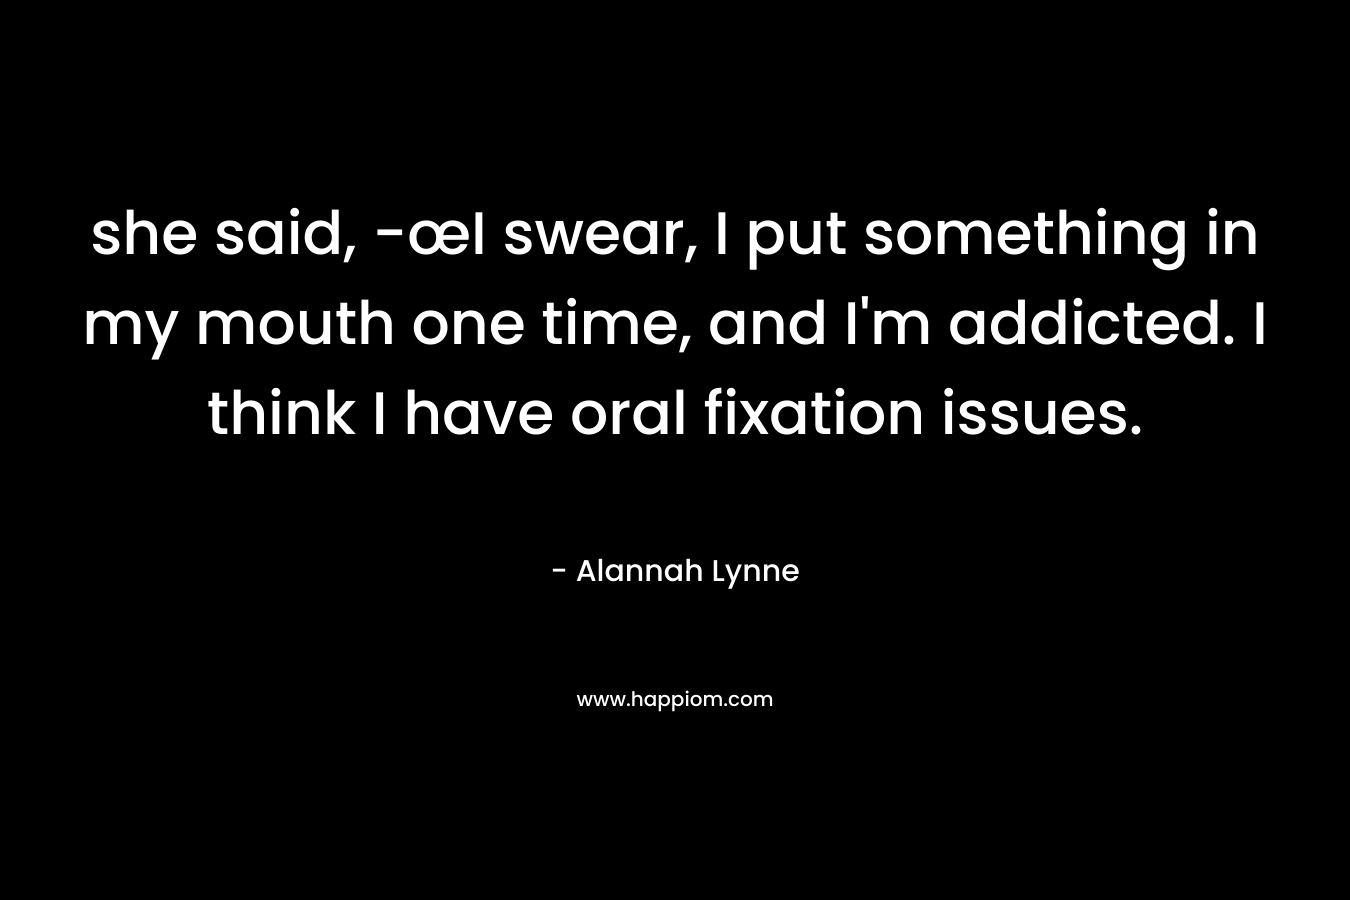 she said, -œI swear, I put something in my mouth one time, and I’m addicted. I think I have oral fixation issues. – Alannah Lynne